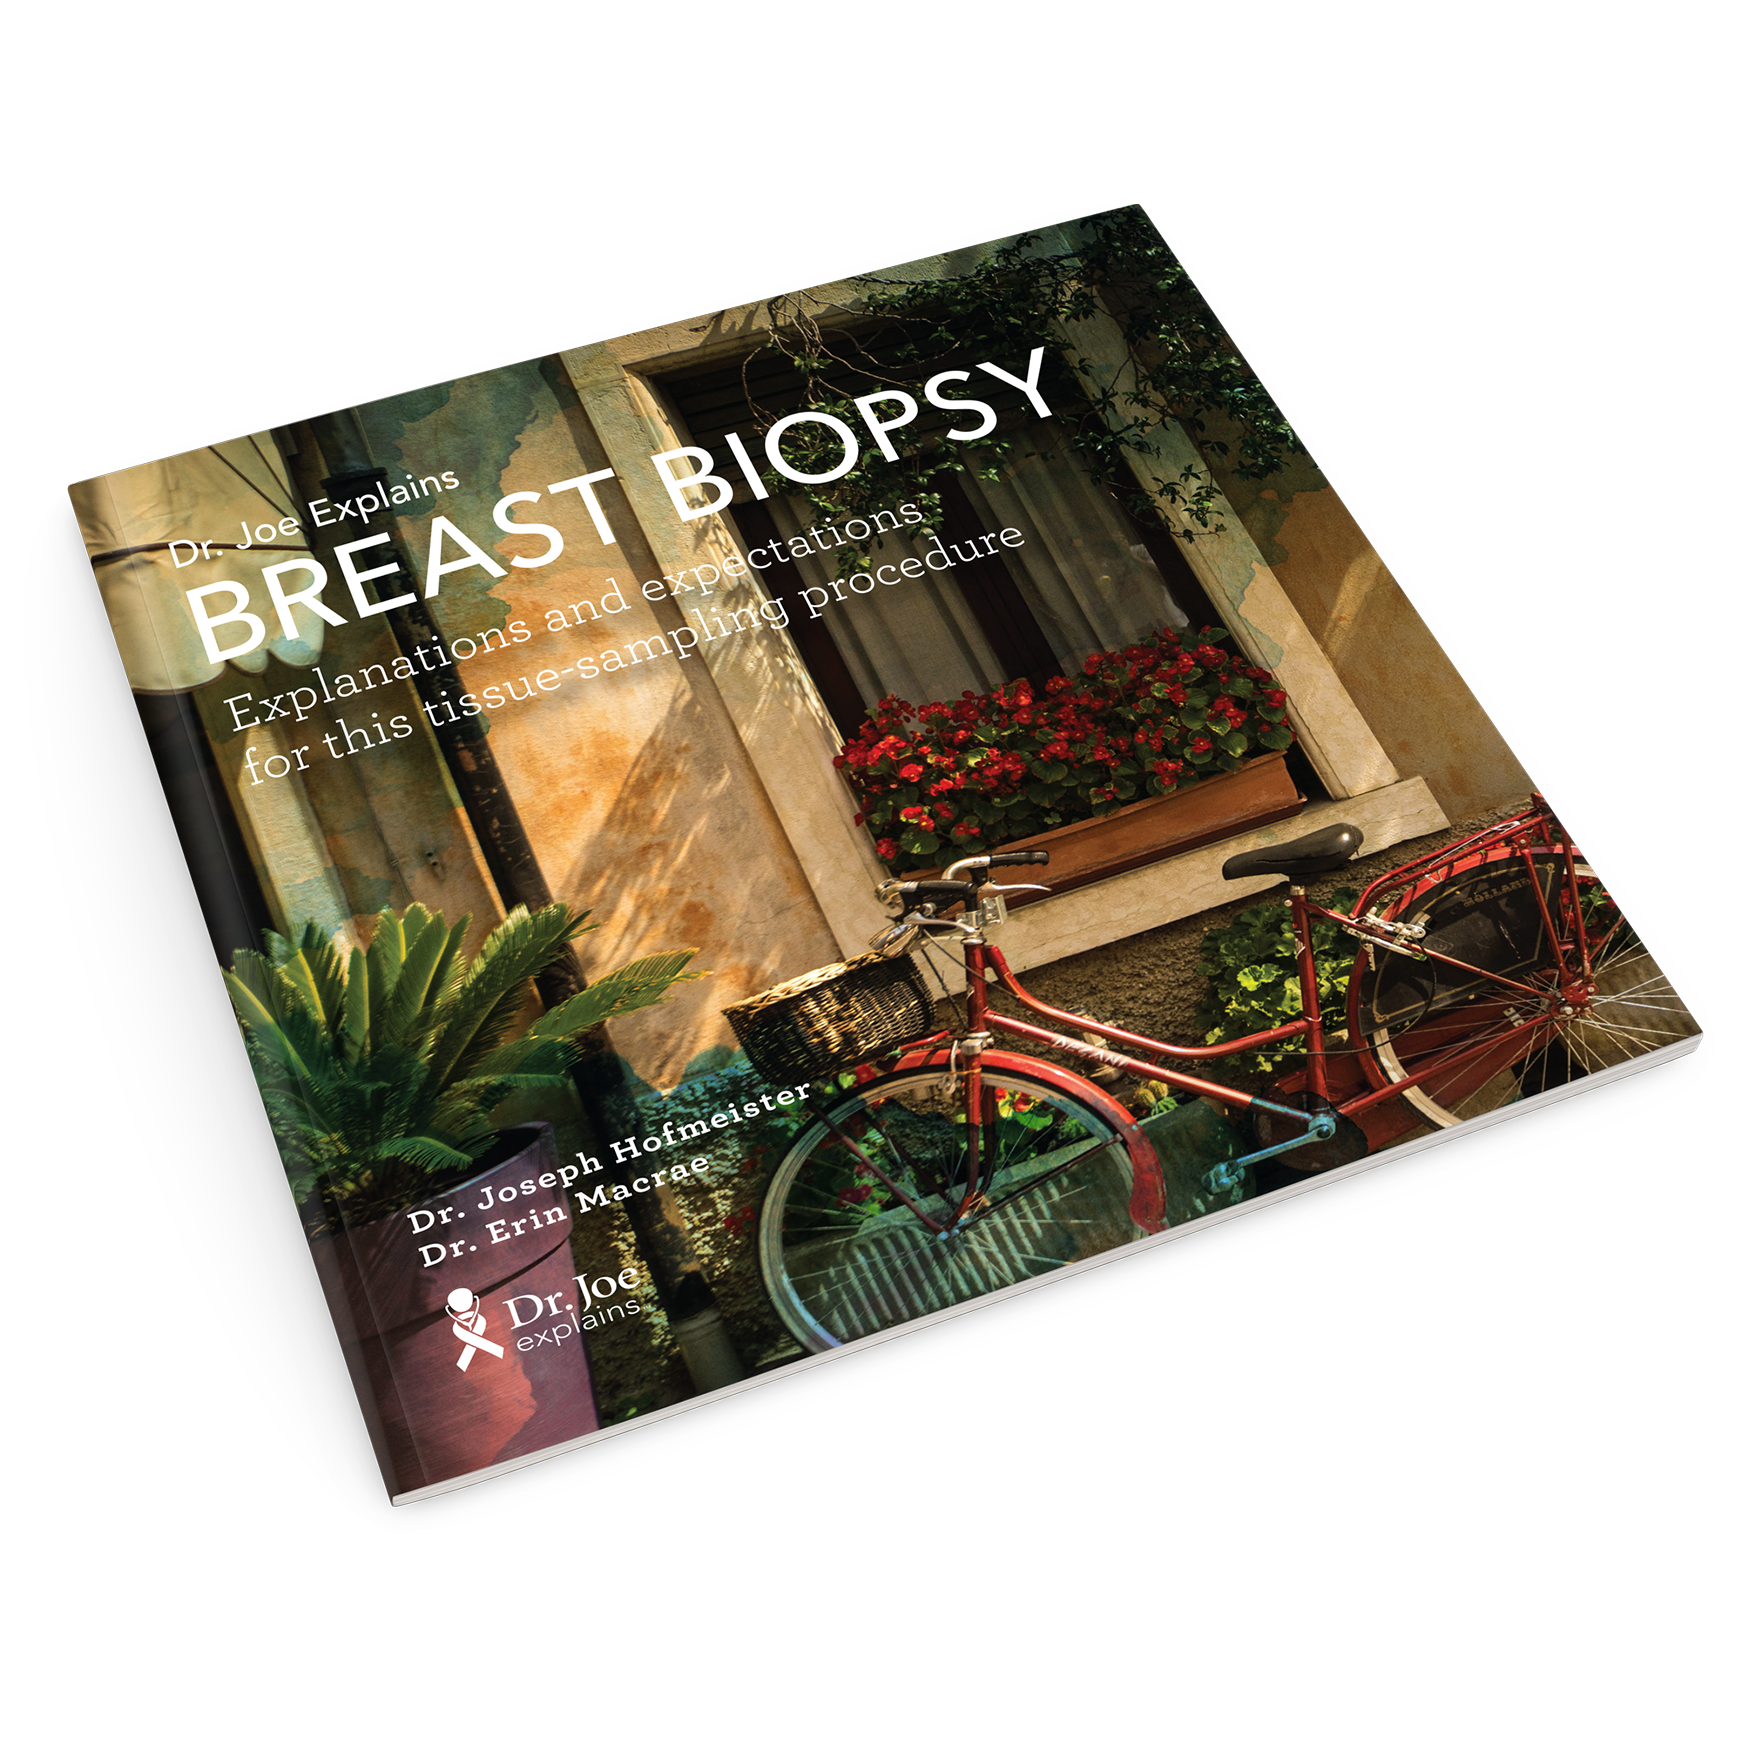 breast biopsy booklet patient education resource